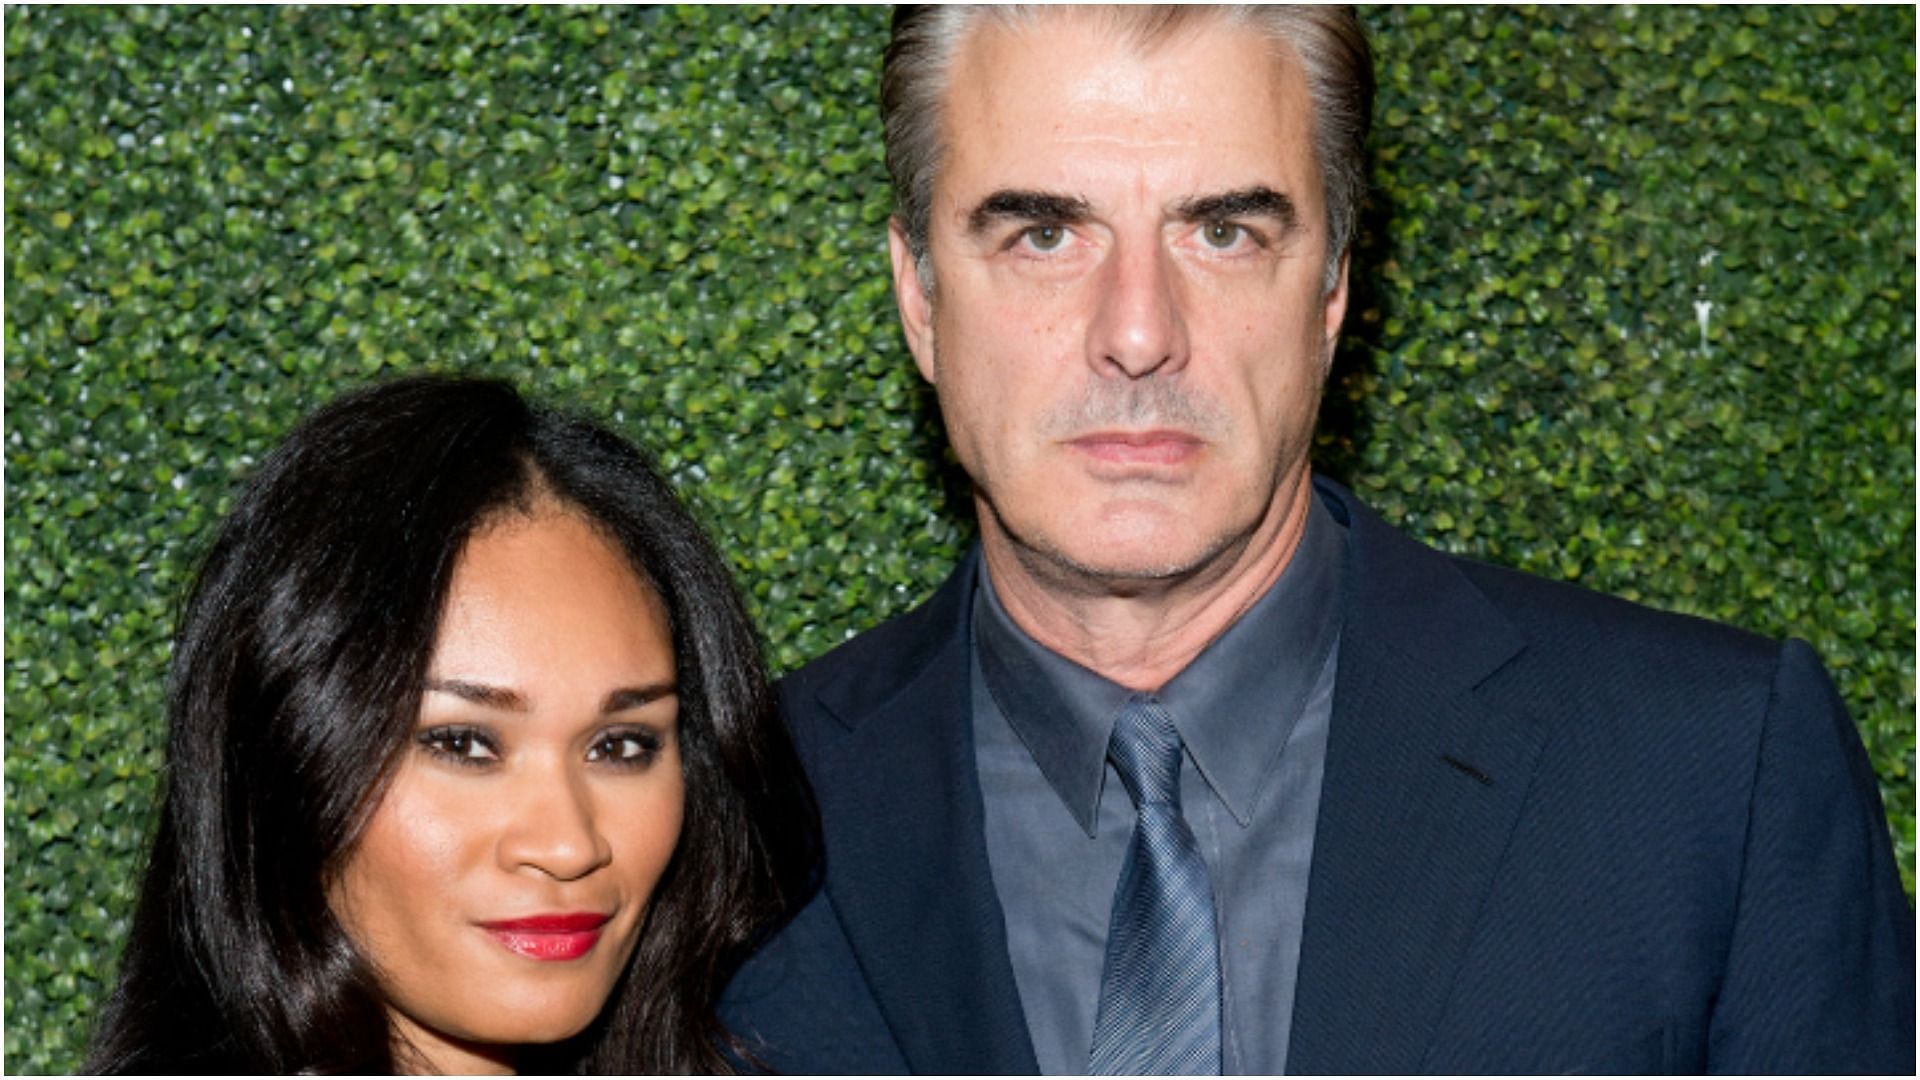 Chris Noth and Tara Wilson attend the &quot;To Catch A Thief&quot; Ralph Lauren screening (Image by Noam Galai via Getty Images)